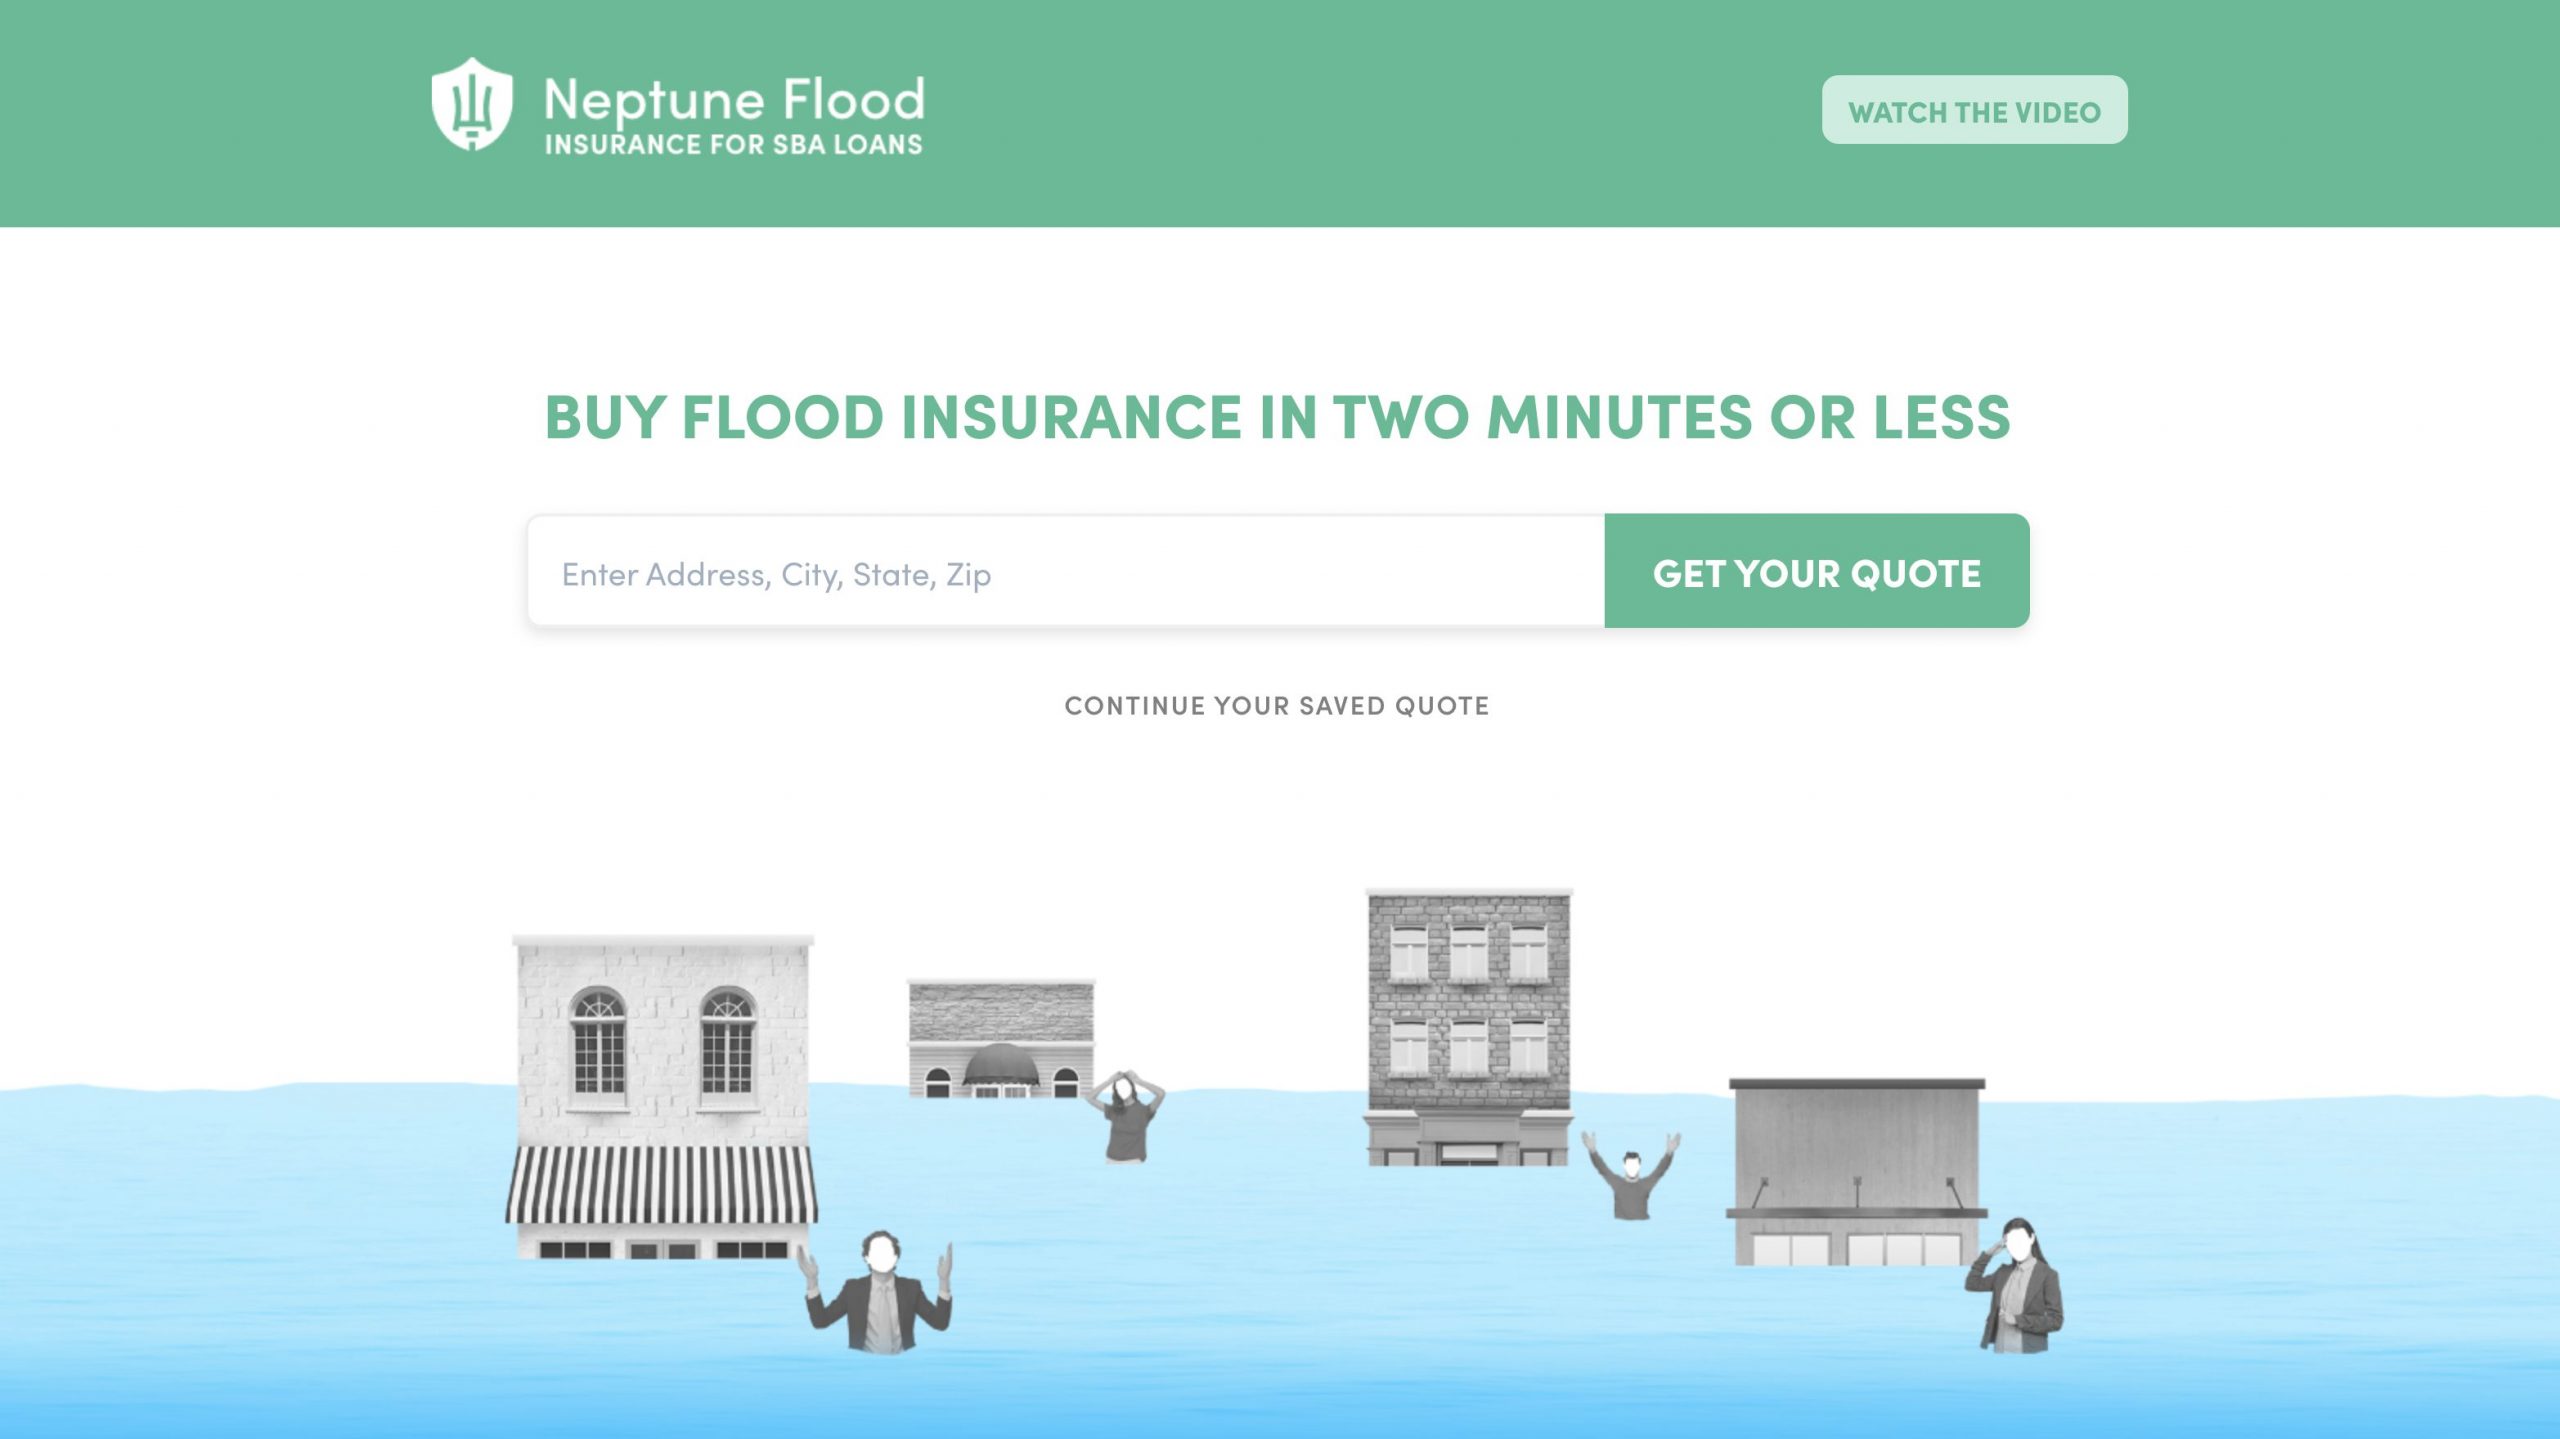 Buy Flood Insurance and SAVE MONEY Too! Get a Free Quote Today.